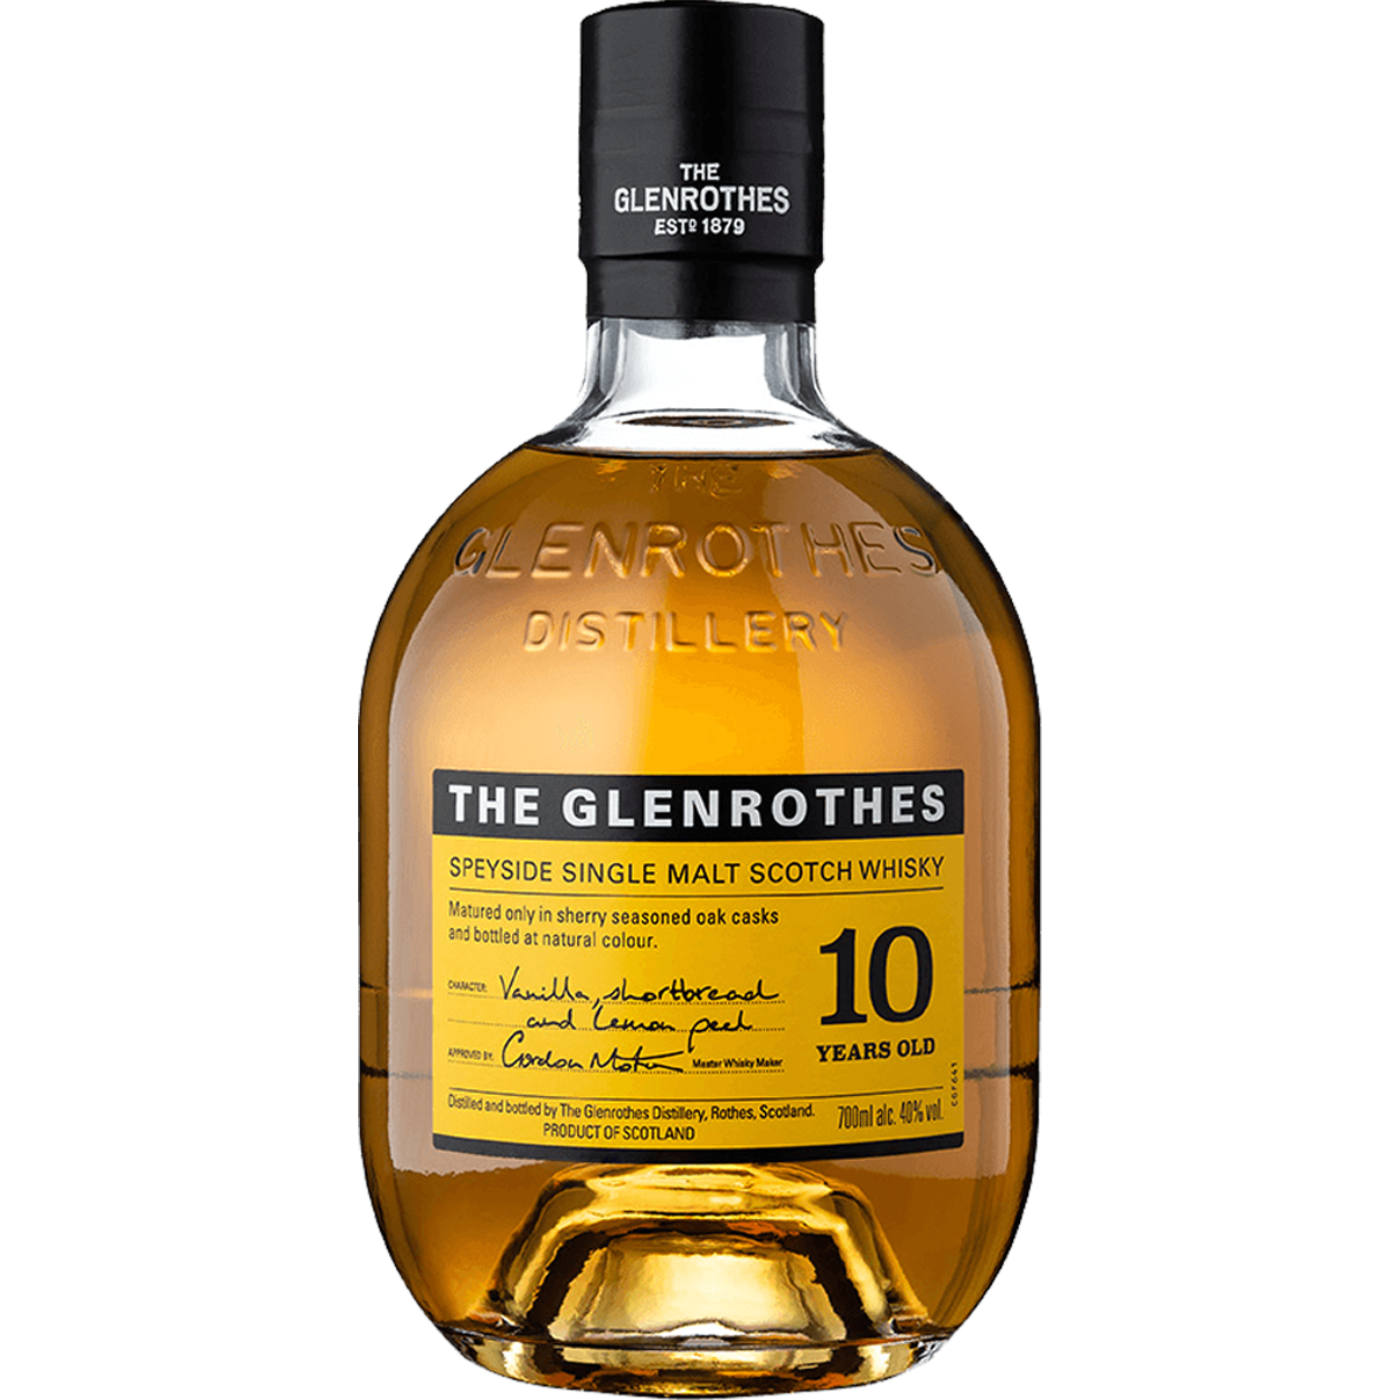 GLENROTHES 10 YEAR OLD